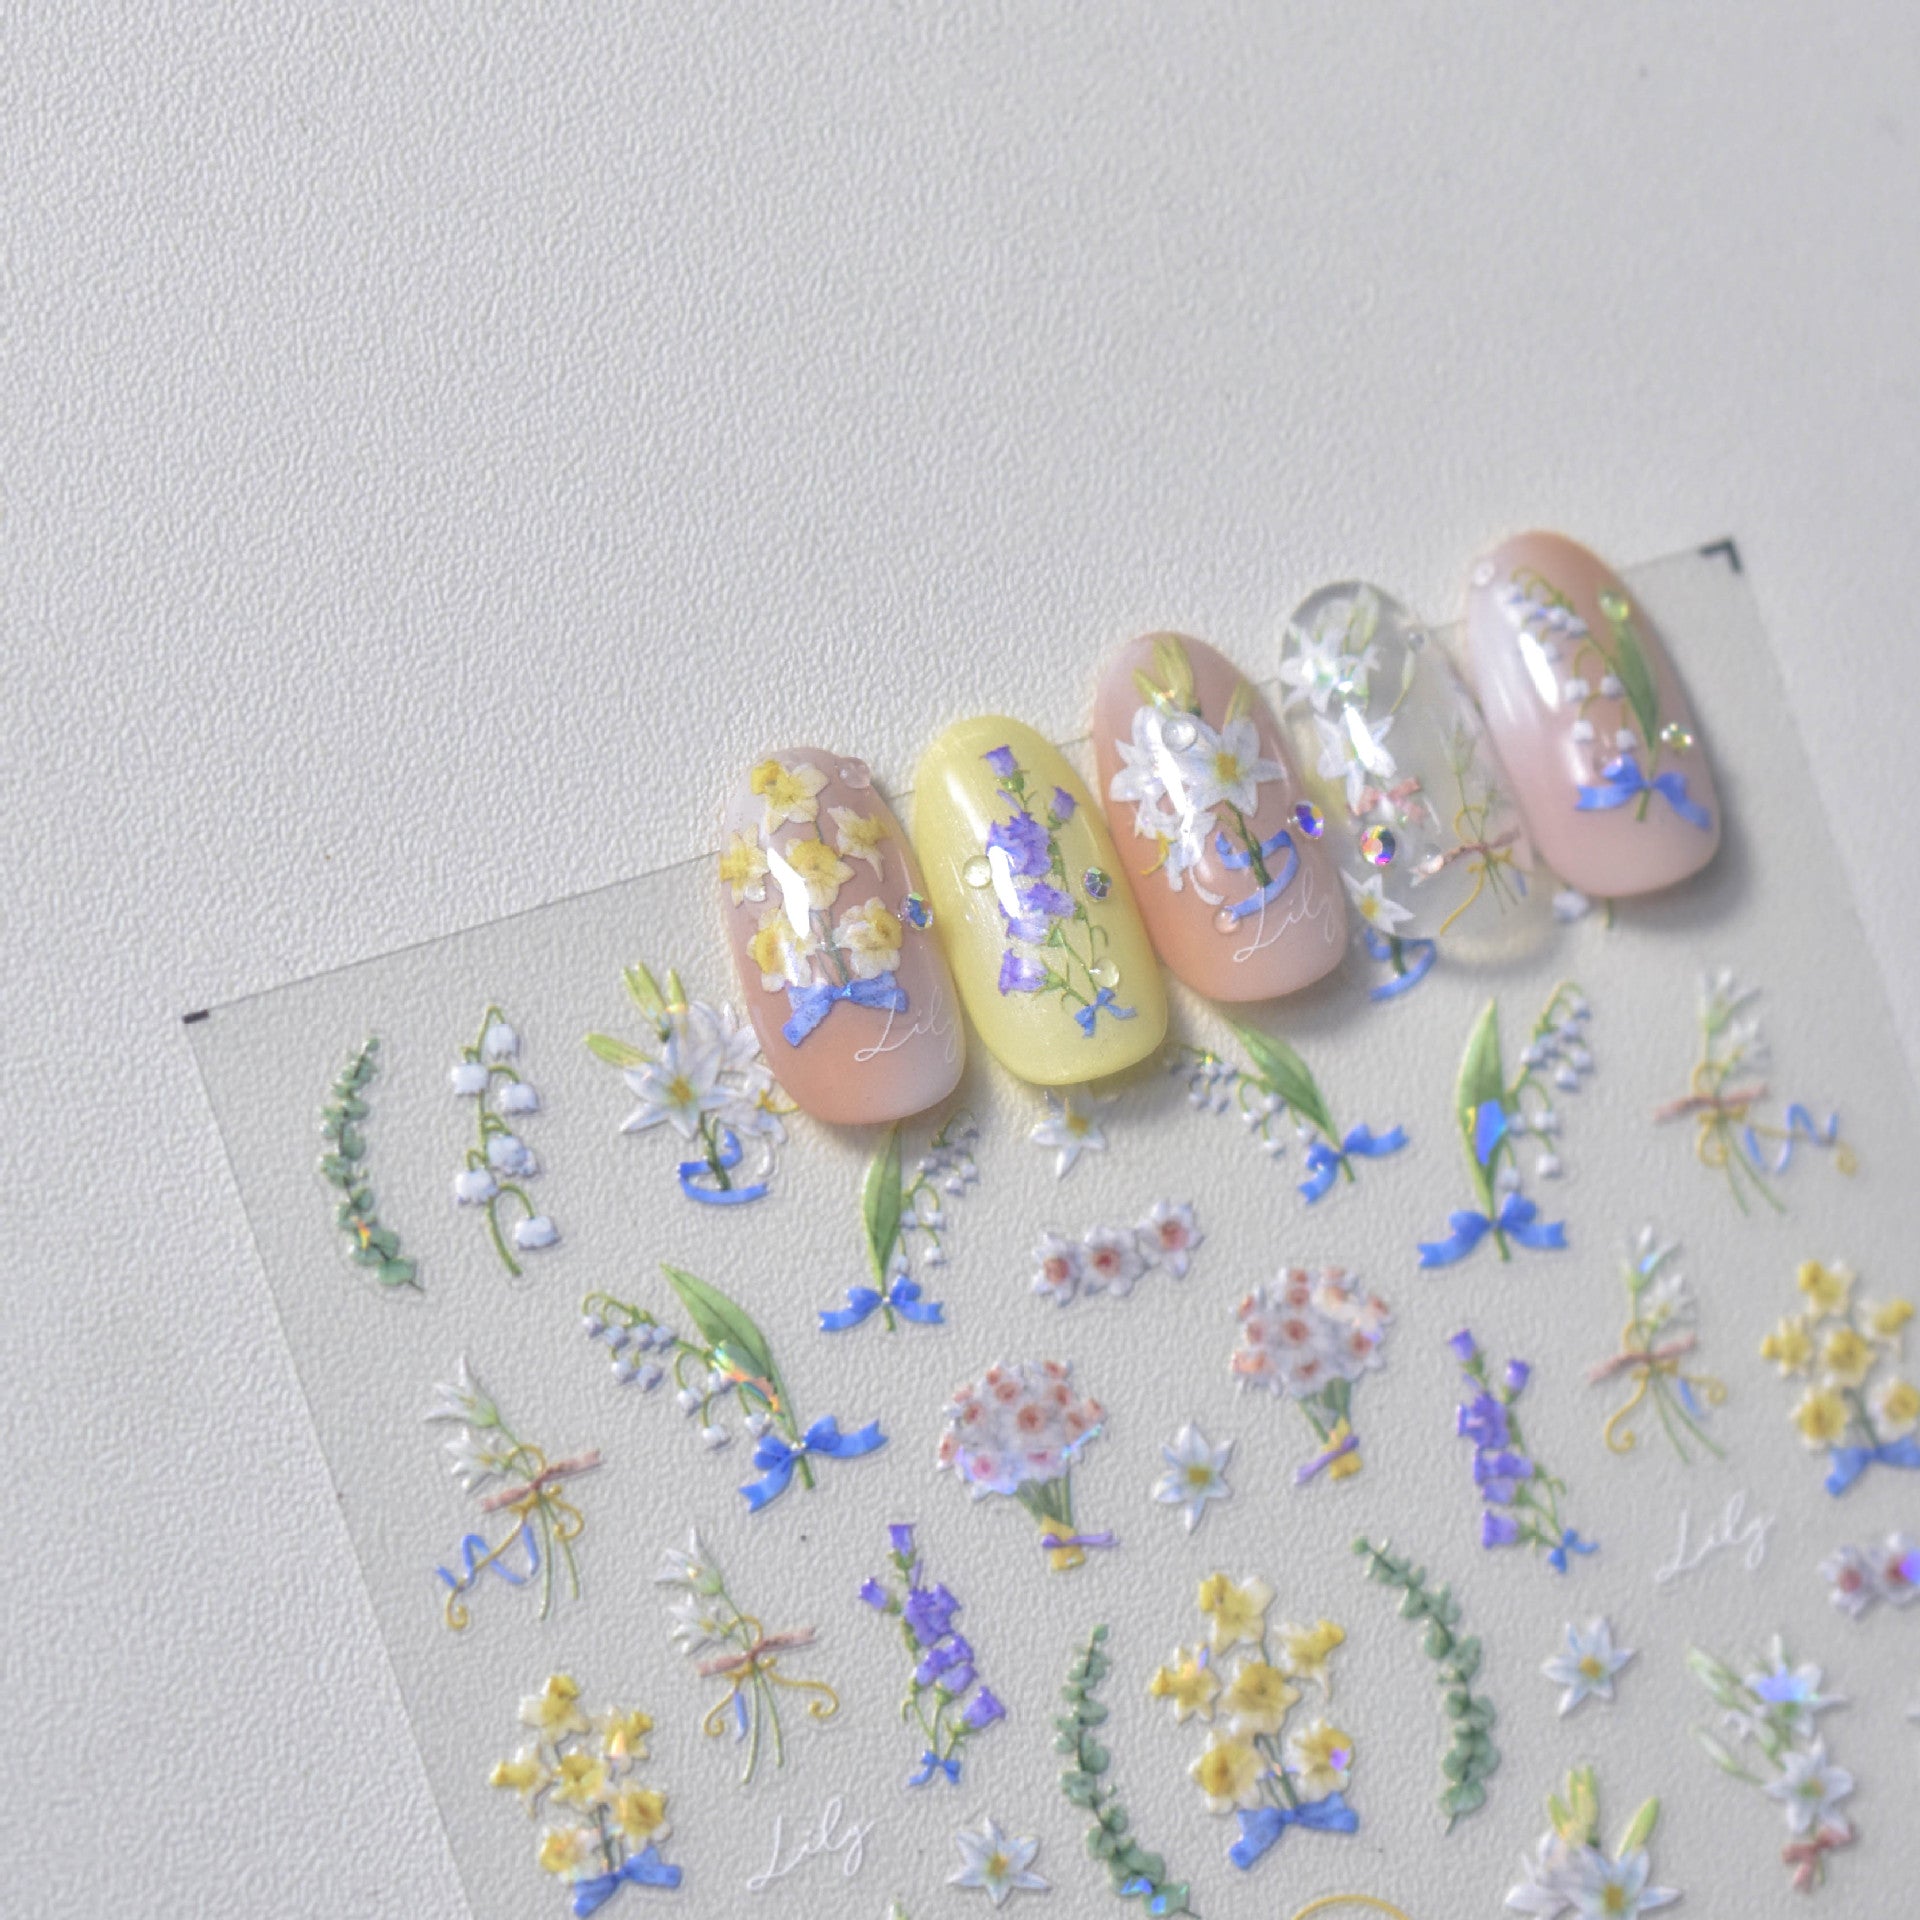 NailMAD Lily Flower Nail Art Stickers Adhesive Embossed Wild Flowers Rose Sticker Decals to3039